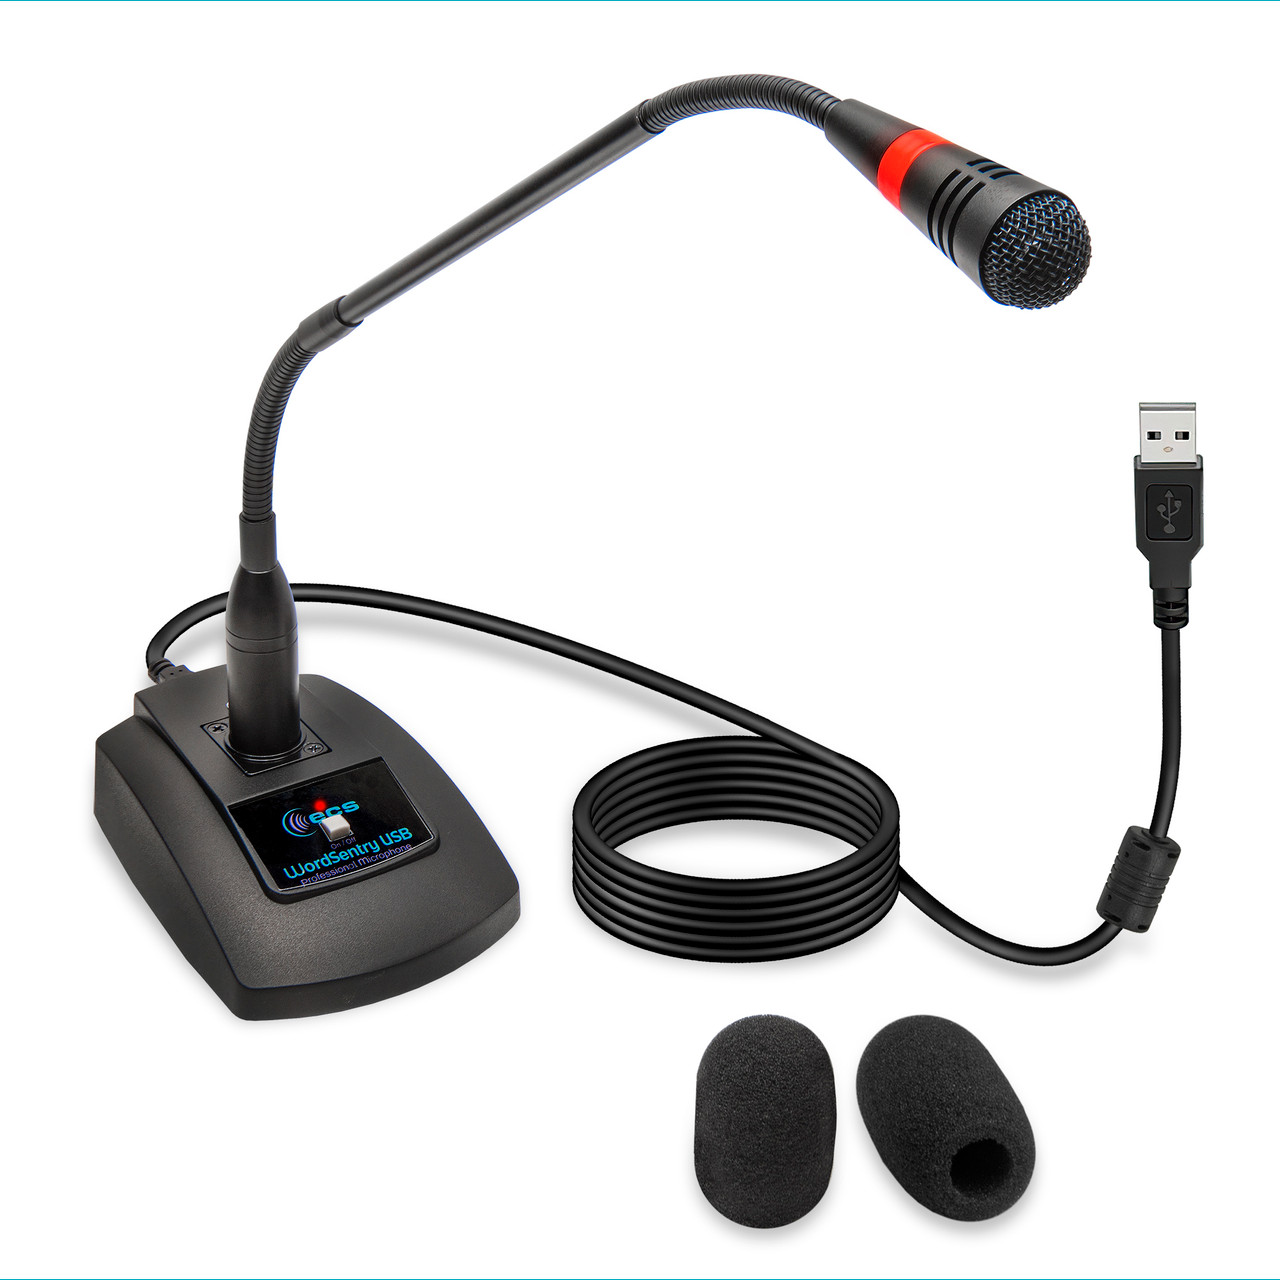 Professional Usb Gaming Microphone For Computer Desktop Condenser Mic 